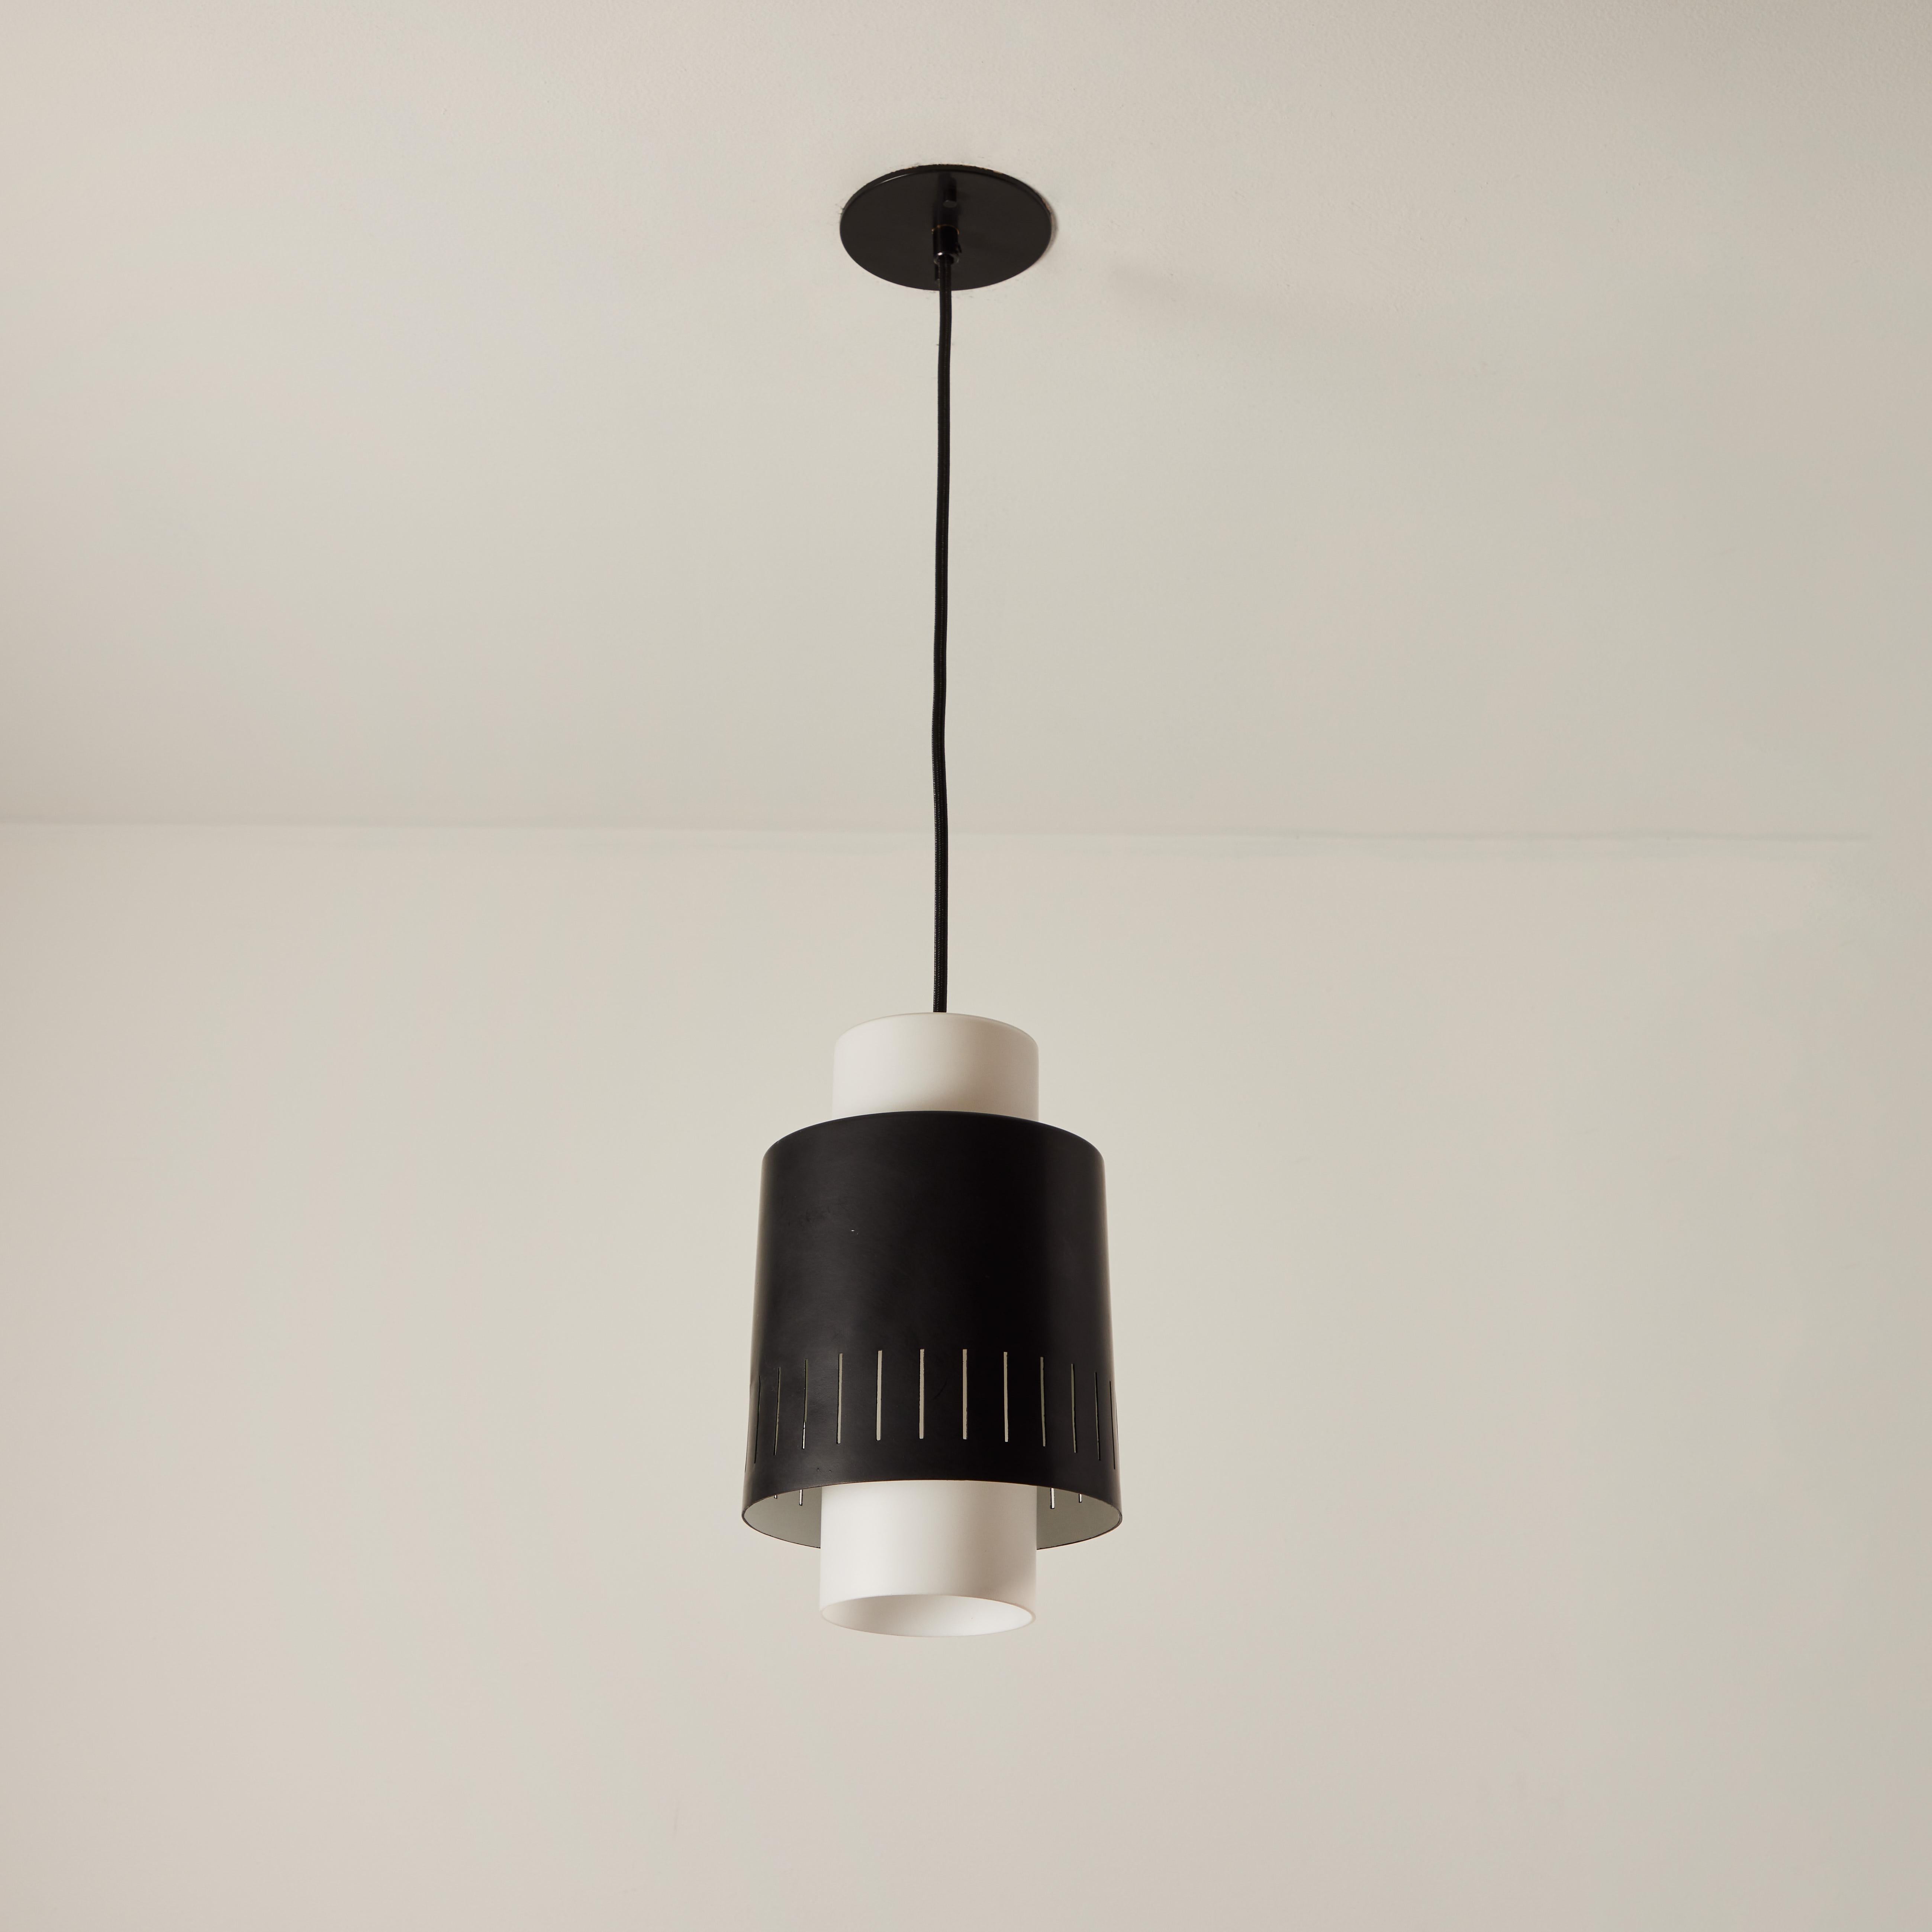 1960s Glass & Perforated Metal Pendant Attributed to Bruno Gatta for Stilnovo For Sale 5